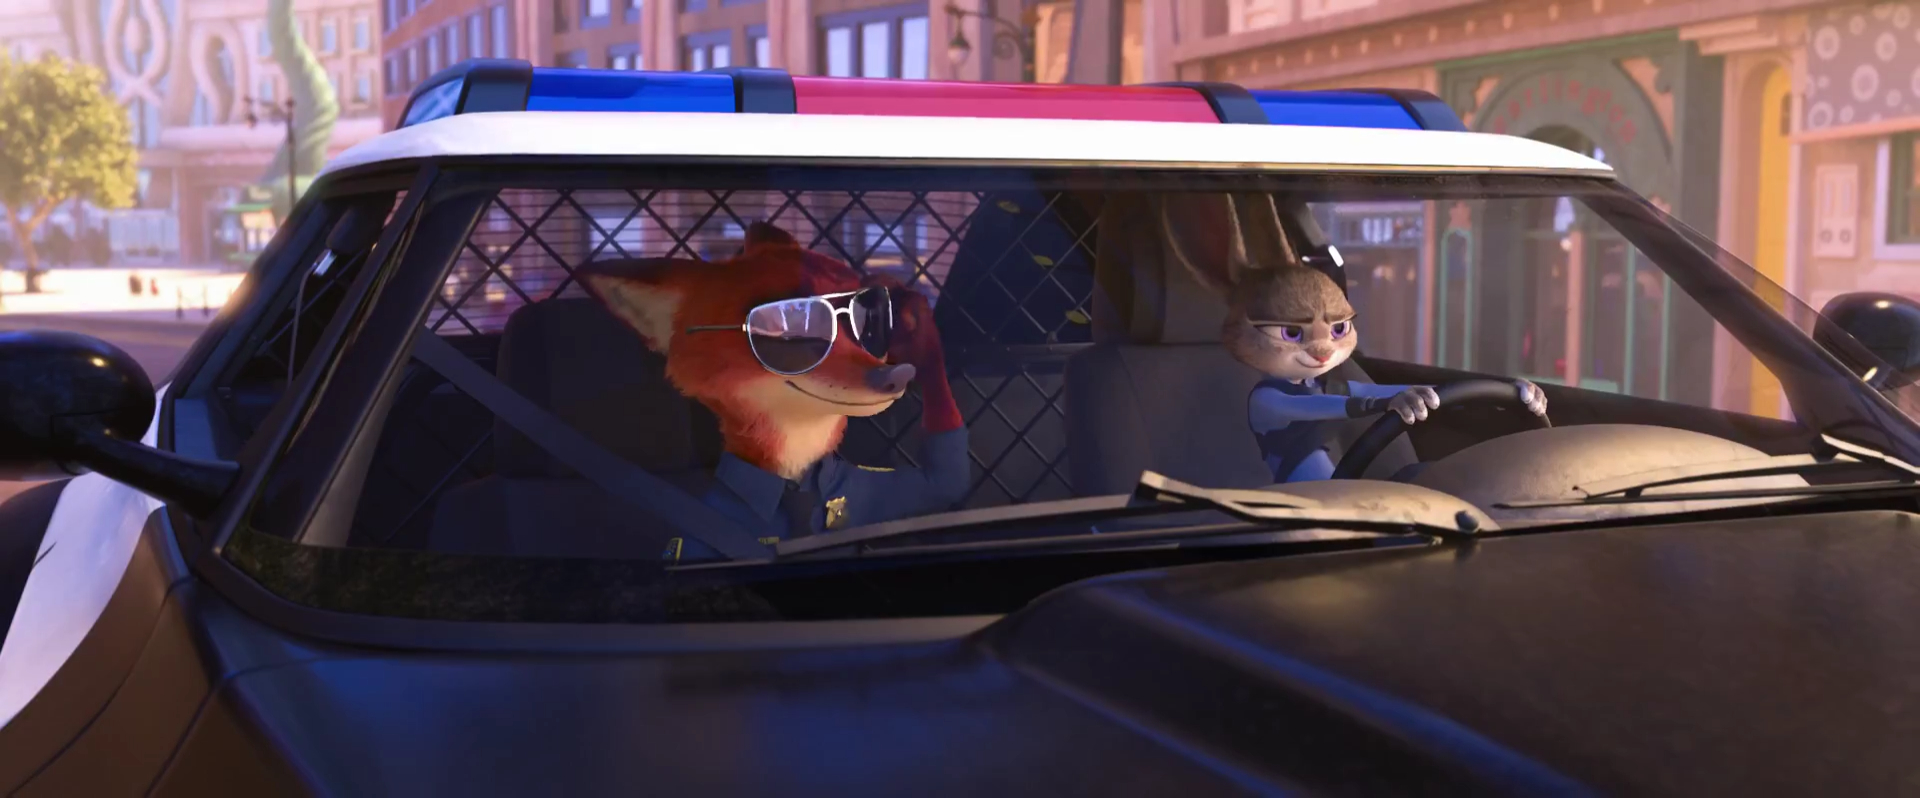 Zootopia_Officers_Nick_and_Judy.jpg